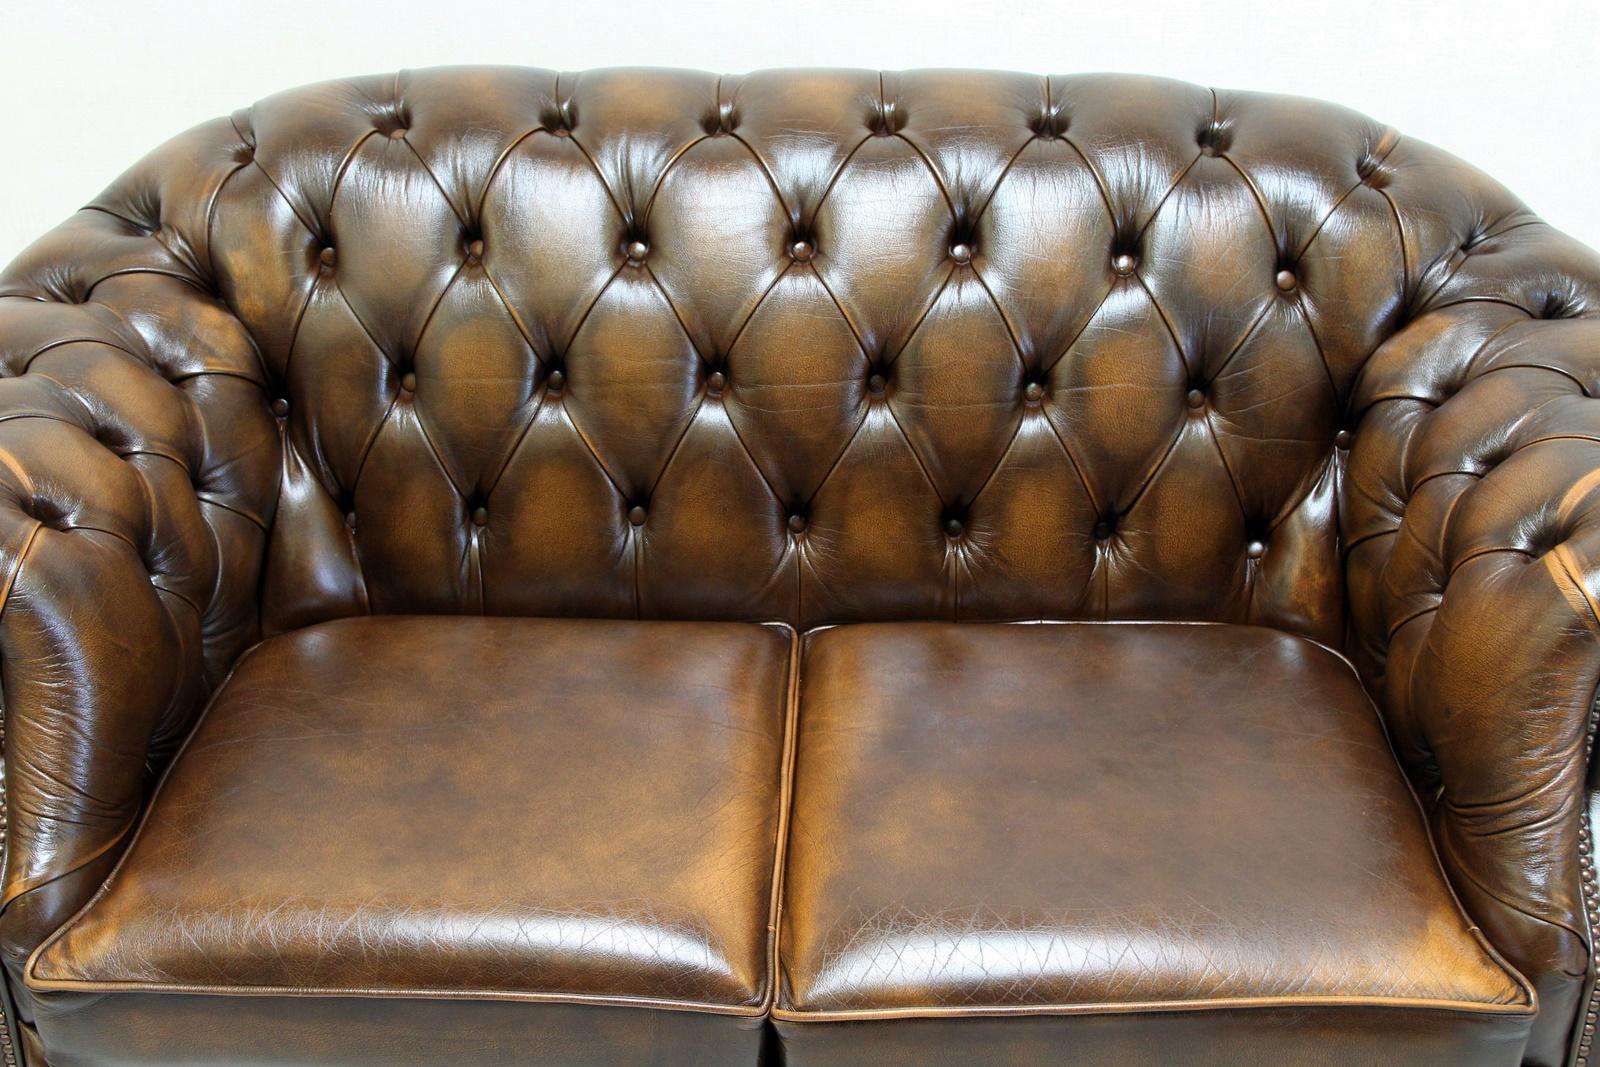 Chesterfield real leather two-seat sofa
in original design
Very comfortable and with beautiful patina
Condition: The sofa is in a very good condition
Sofa:
Heightx79cm lengthx165cm depthx90cm
Seat: foam
Upholstery is in good condition with